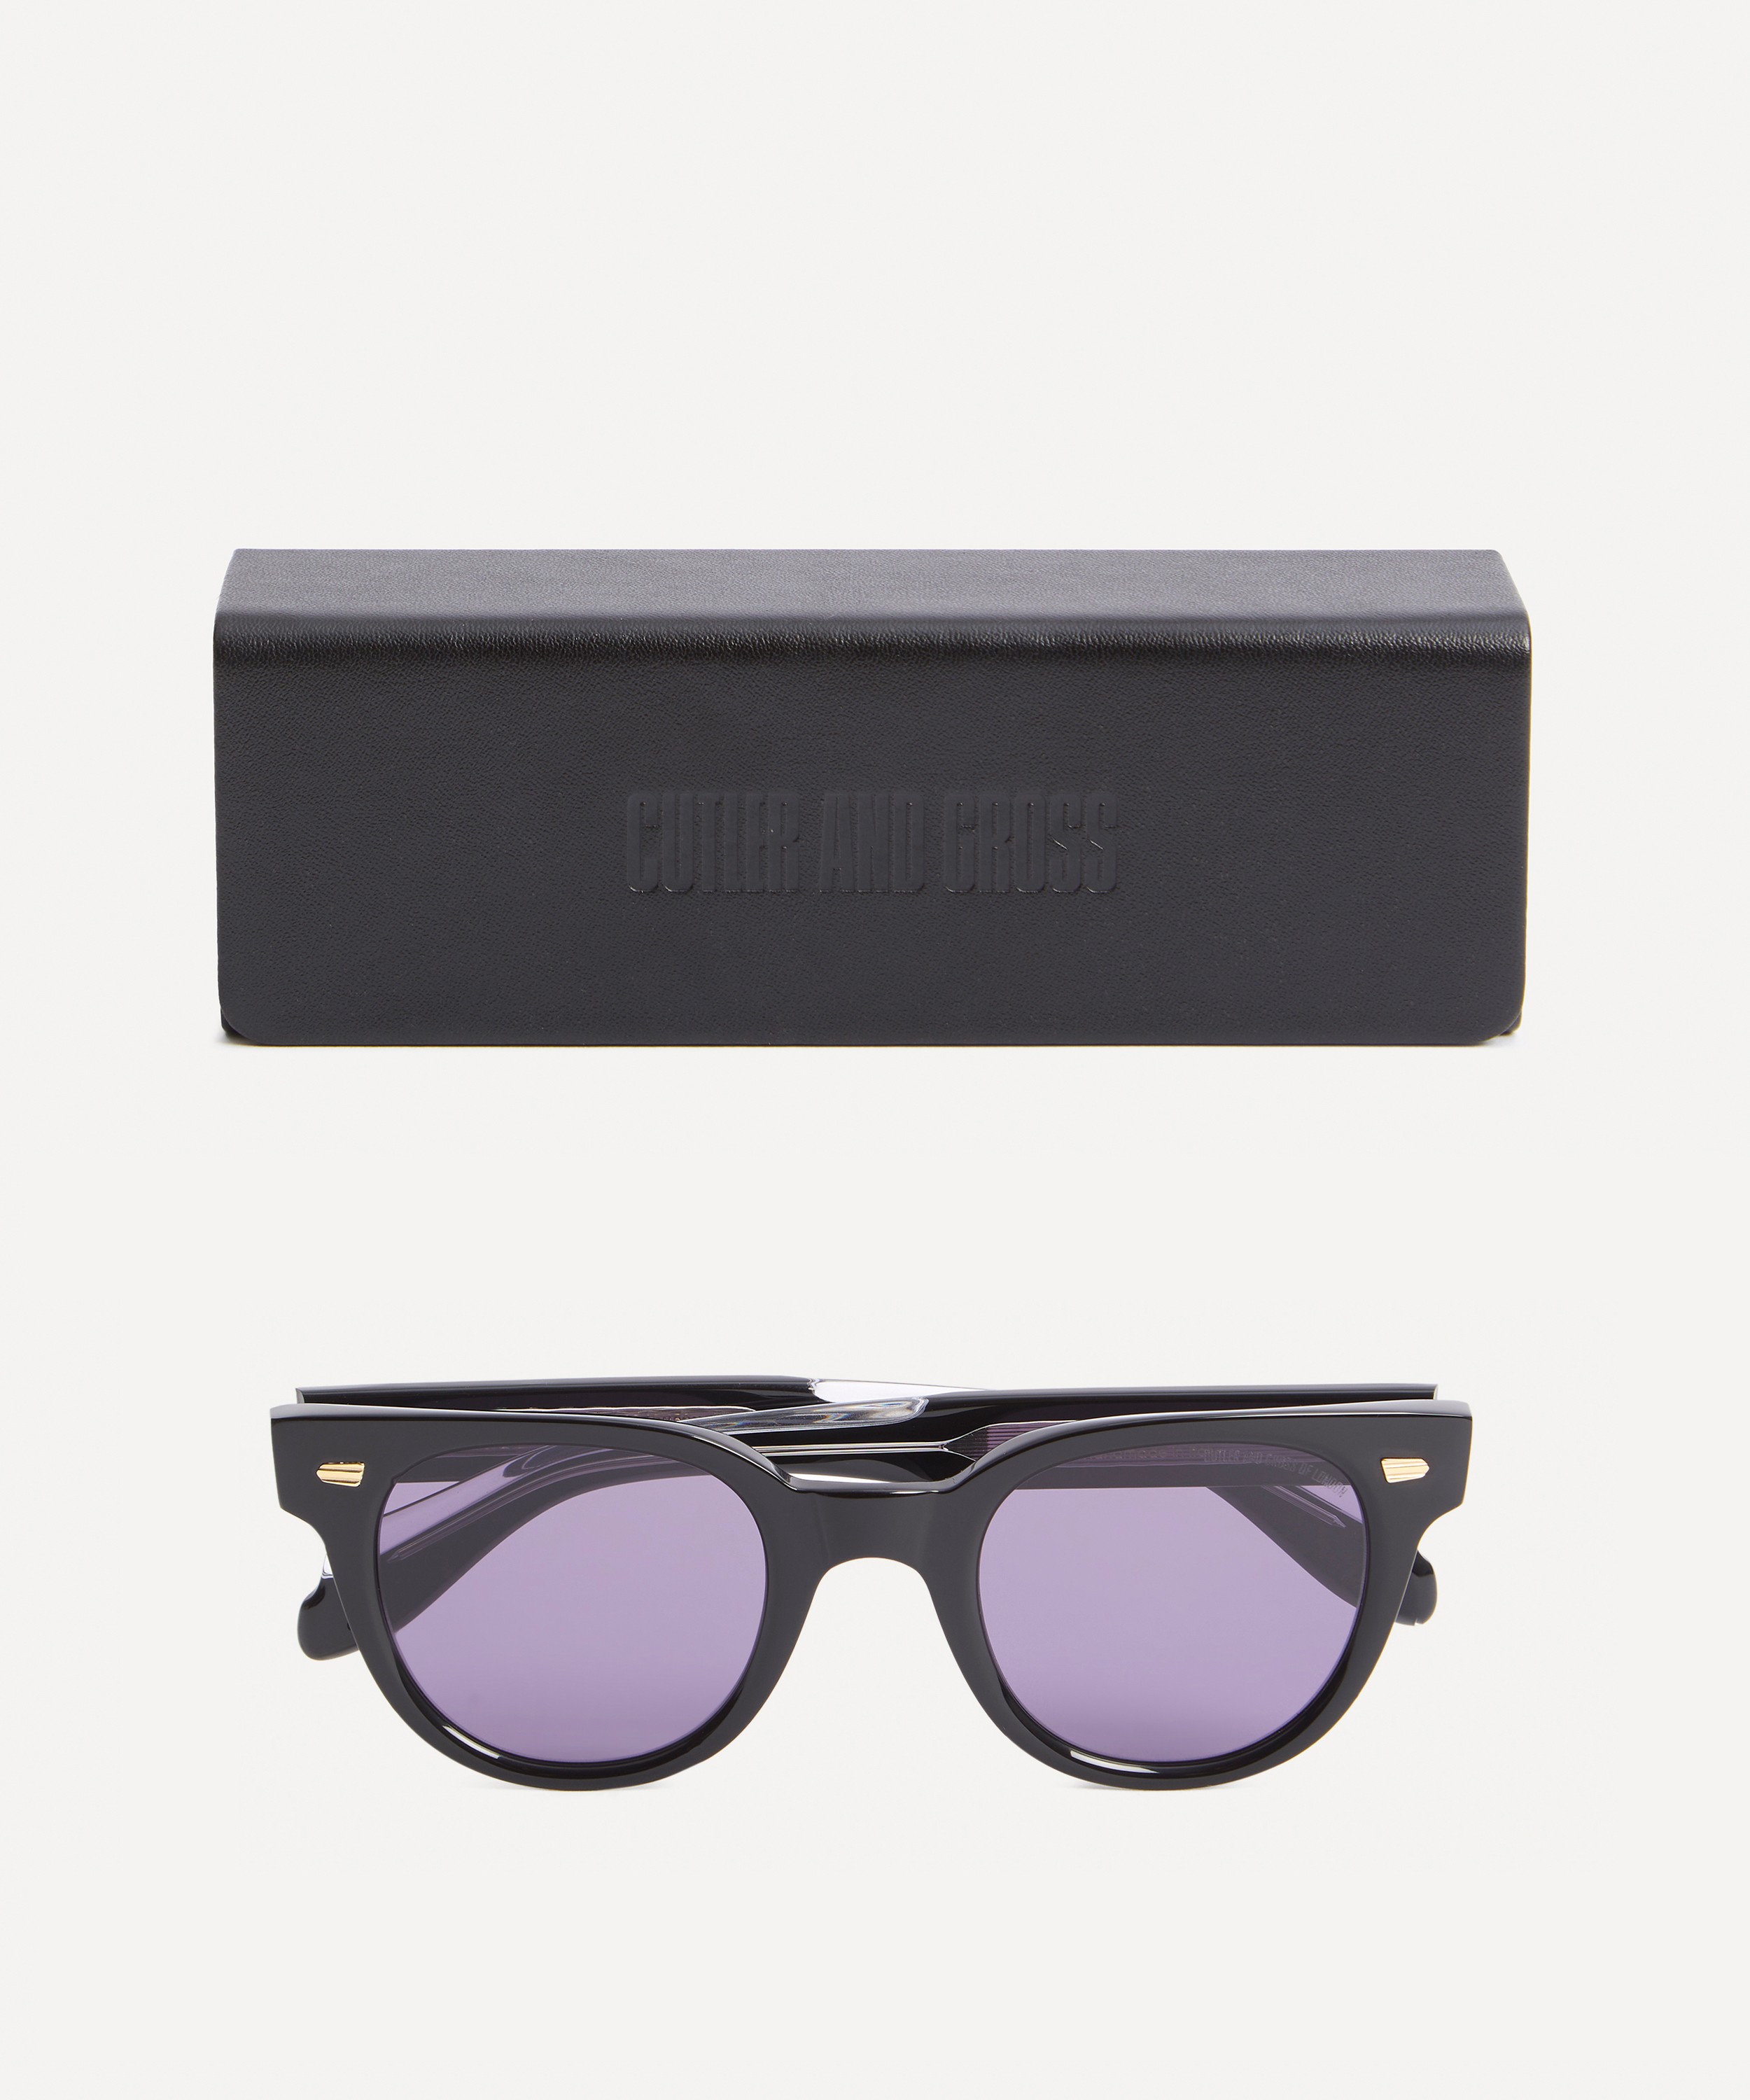 Cutler And Gross - Acetate Round Sunglasses image number 3